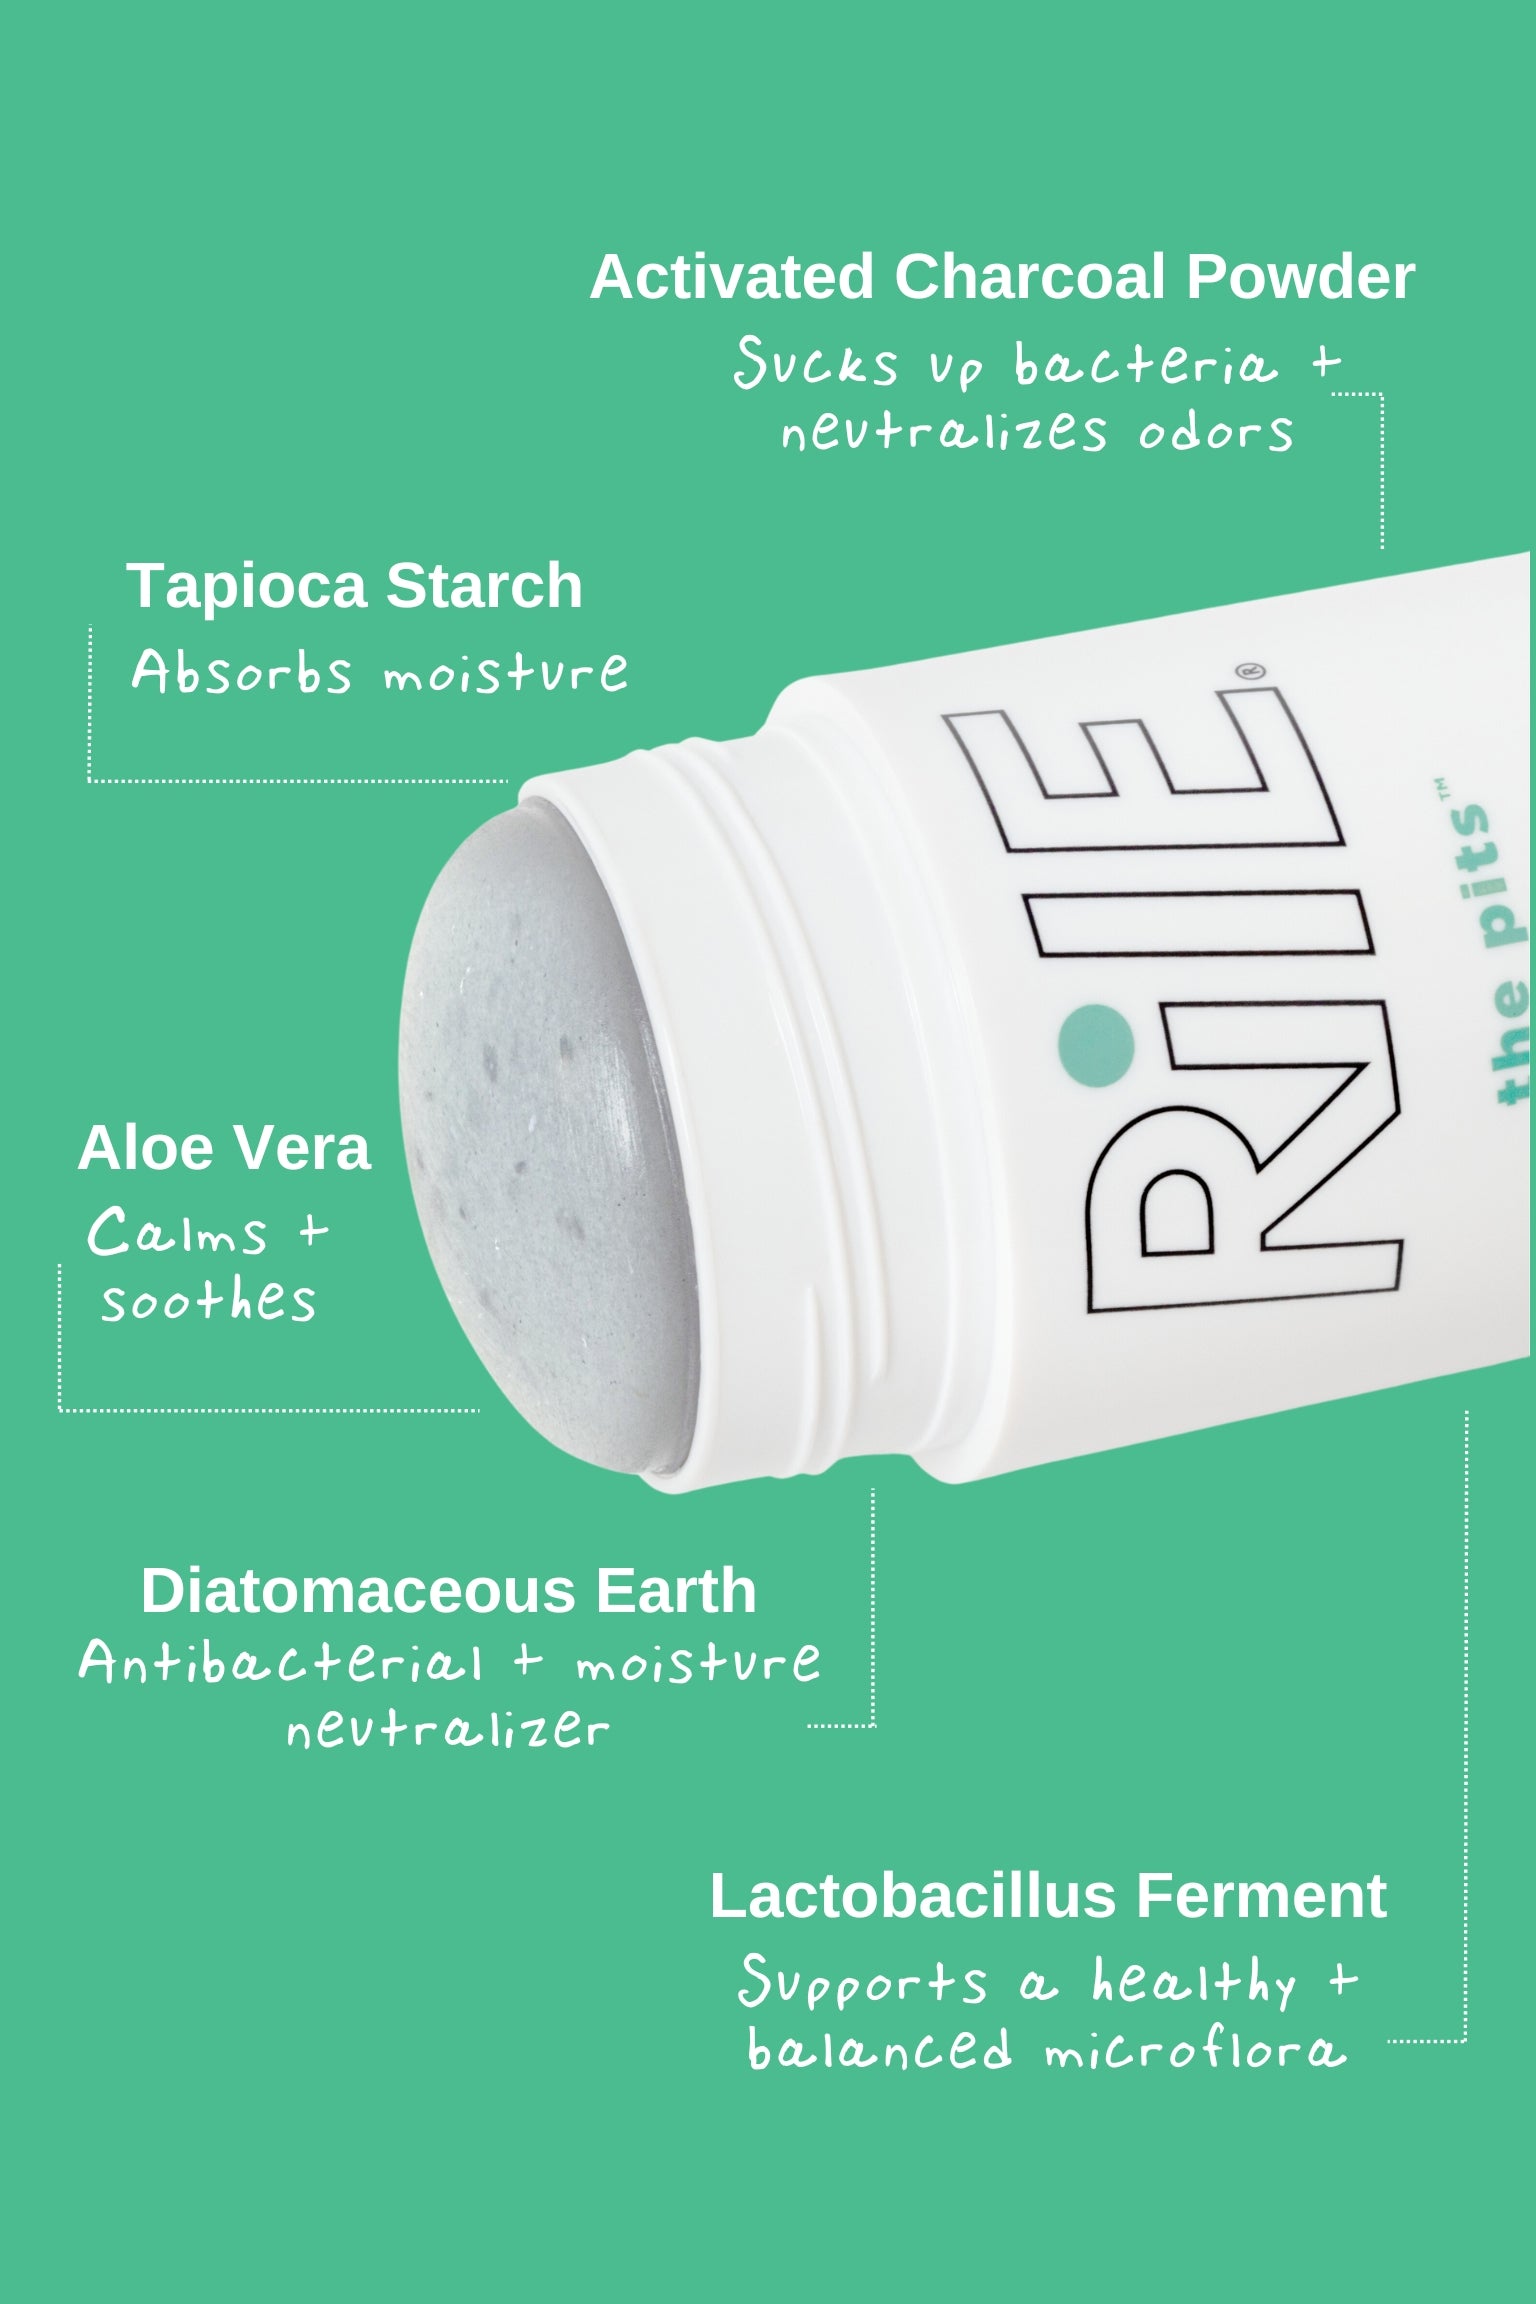 The white deodorant stick has the cap off showing the Rile deodorant stick. the ingredients activated charcoal powder, tapioca starch, Aloe Vera, Diatomaceous earth and lactobacillus ferment are highlighted and how they absorb moisture, neutralize odors and calm and soothe.